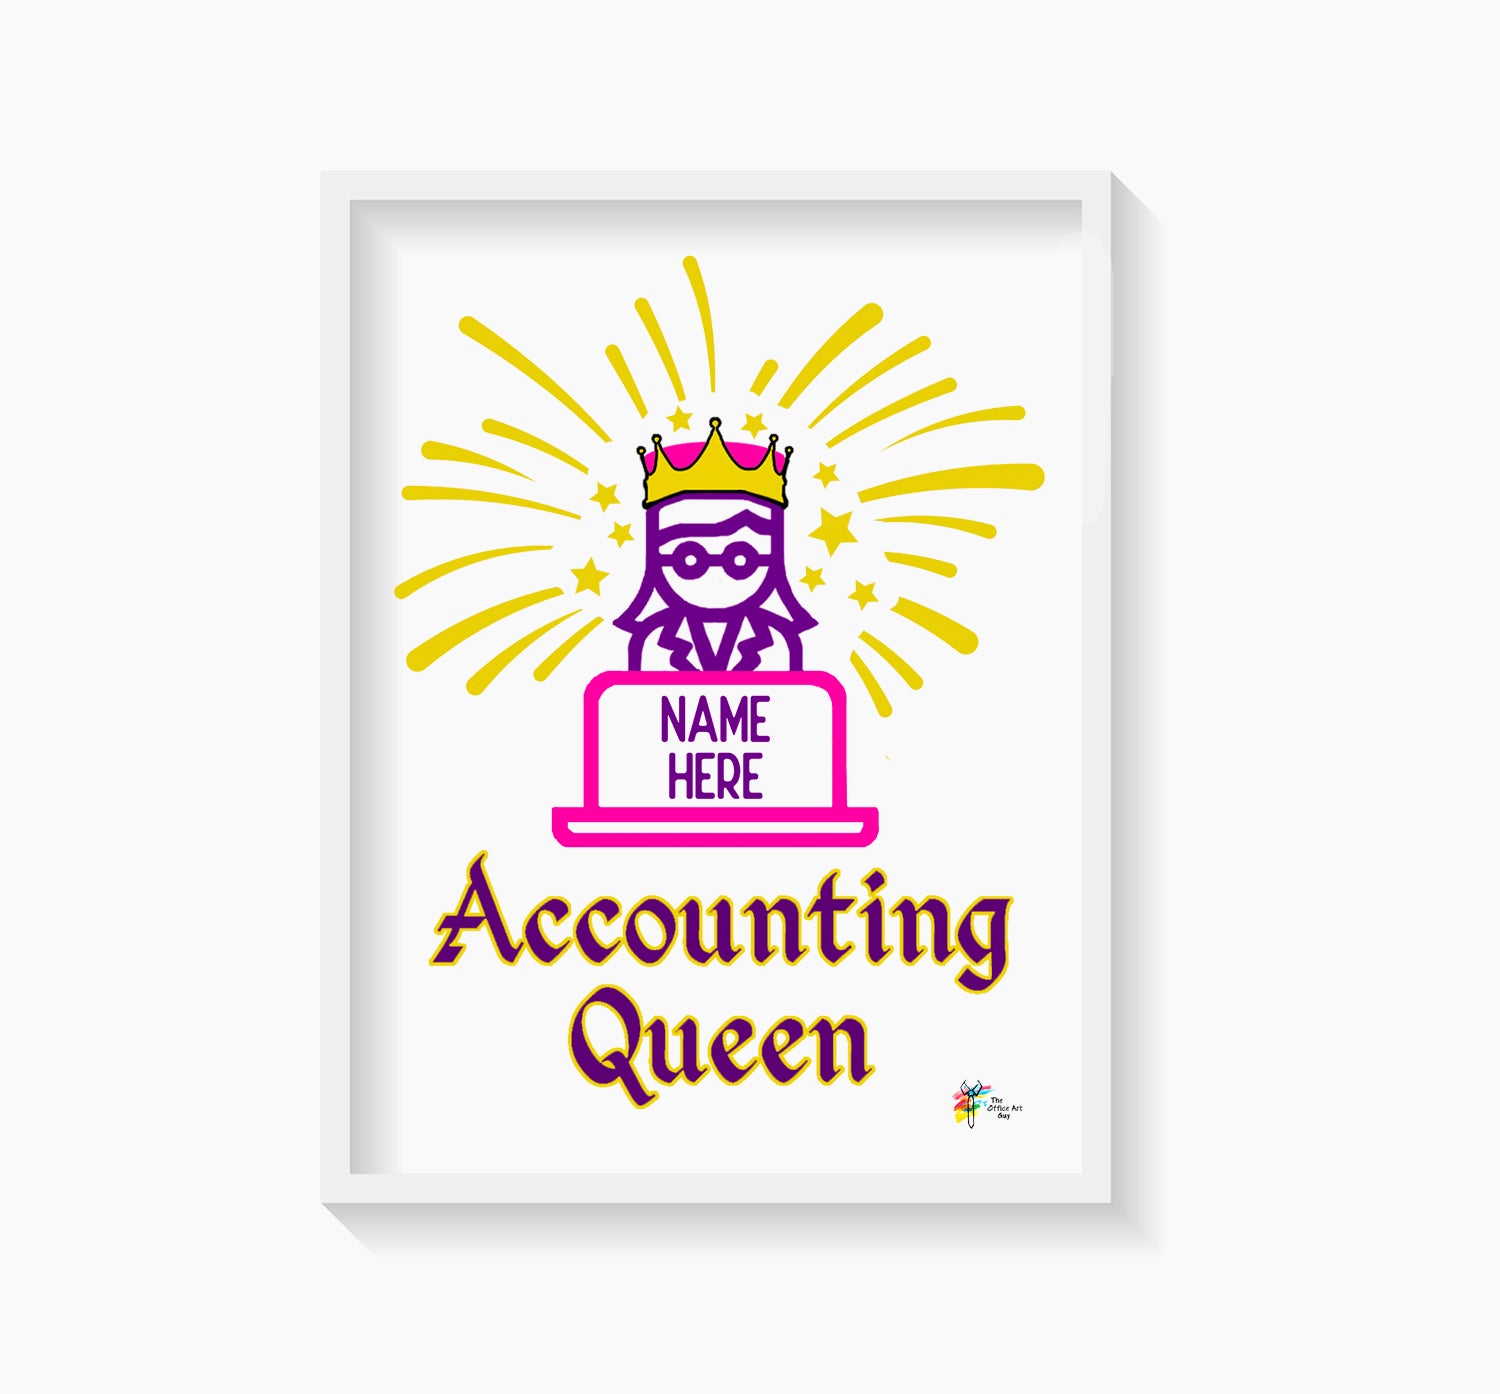 Accounting Queen Art Print for Accountants